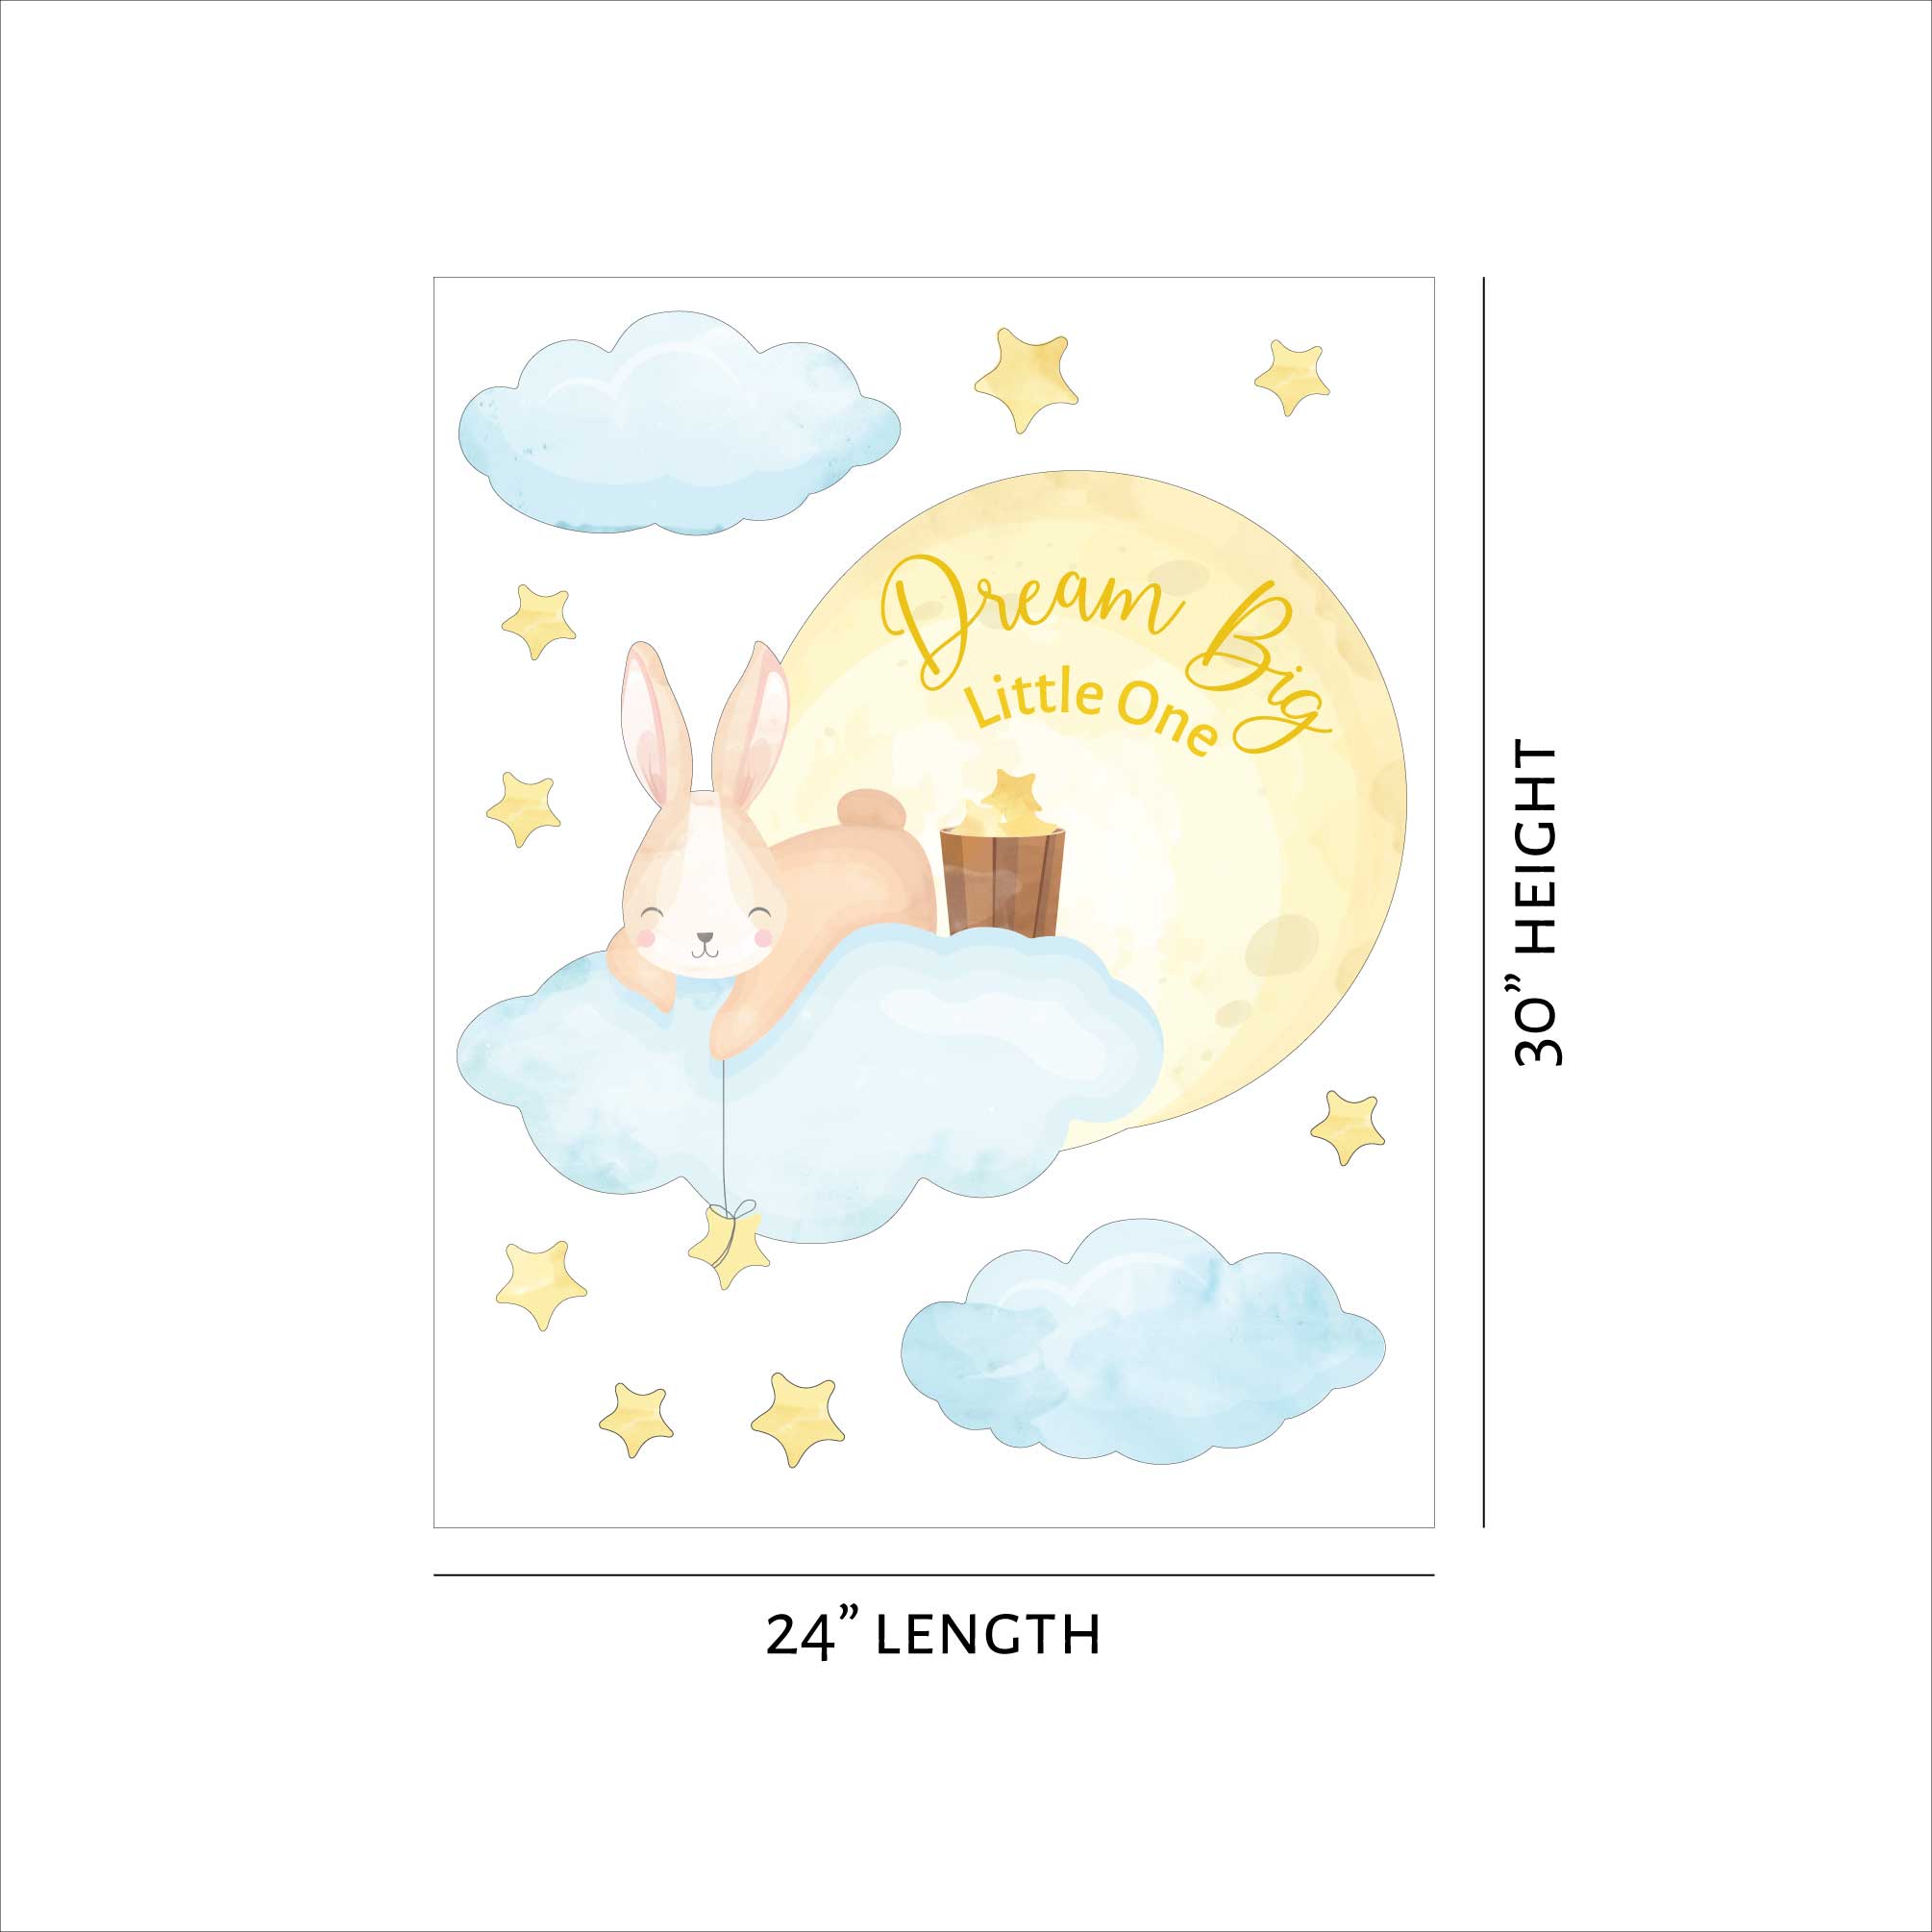 Bunny On A Moon Wall Decal Sticker